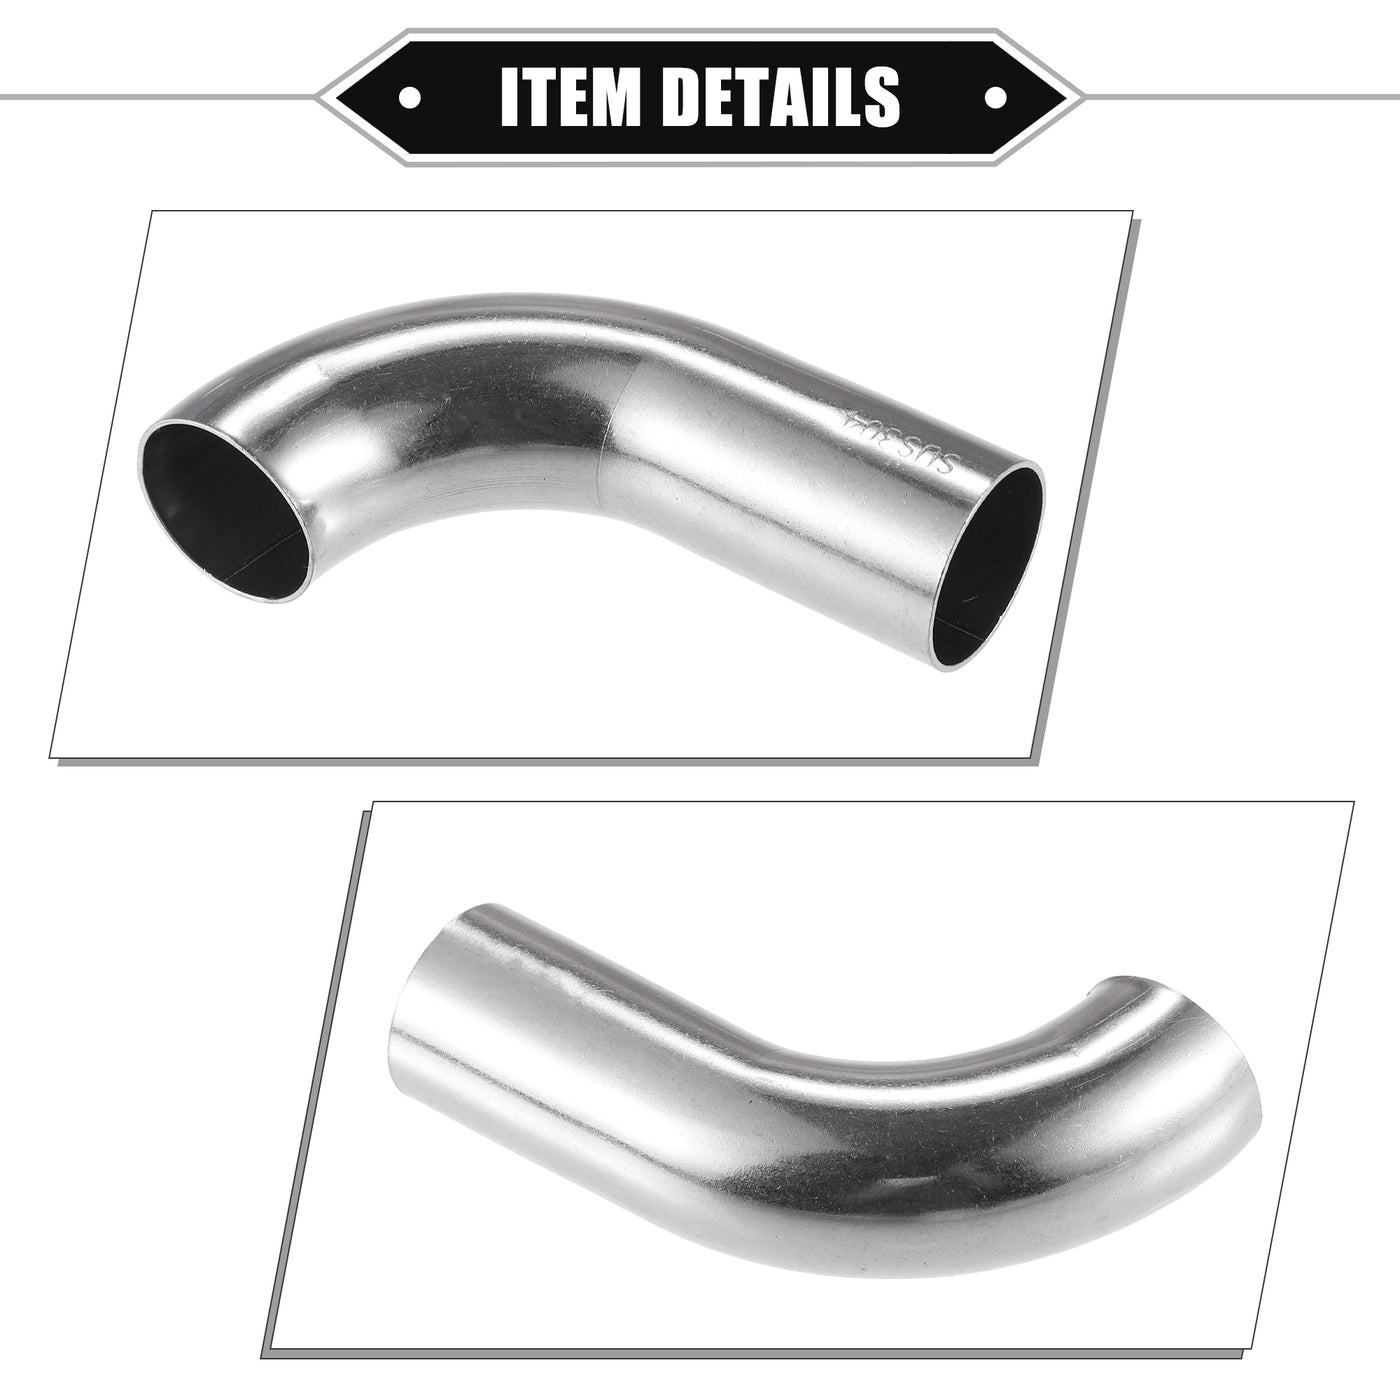 VekAuto 2 Pcs Bend Elbow Pipe Tube, 1" OD 3.43" 1.97" Leg 90 Degree DIY Exhaust Pipe Intercooler Air Intake Tube Universal for Car Truck Durable 304 Stainless Steel Silver Tone